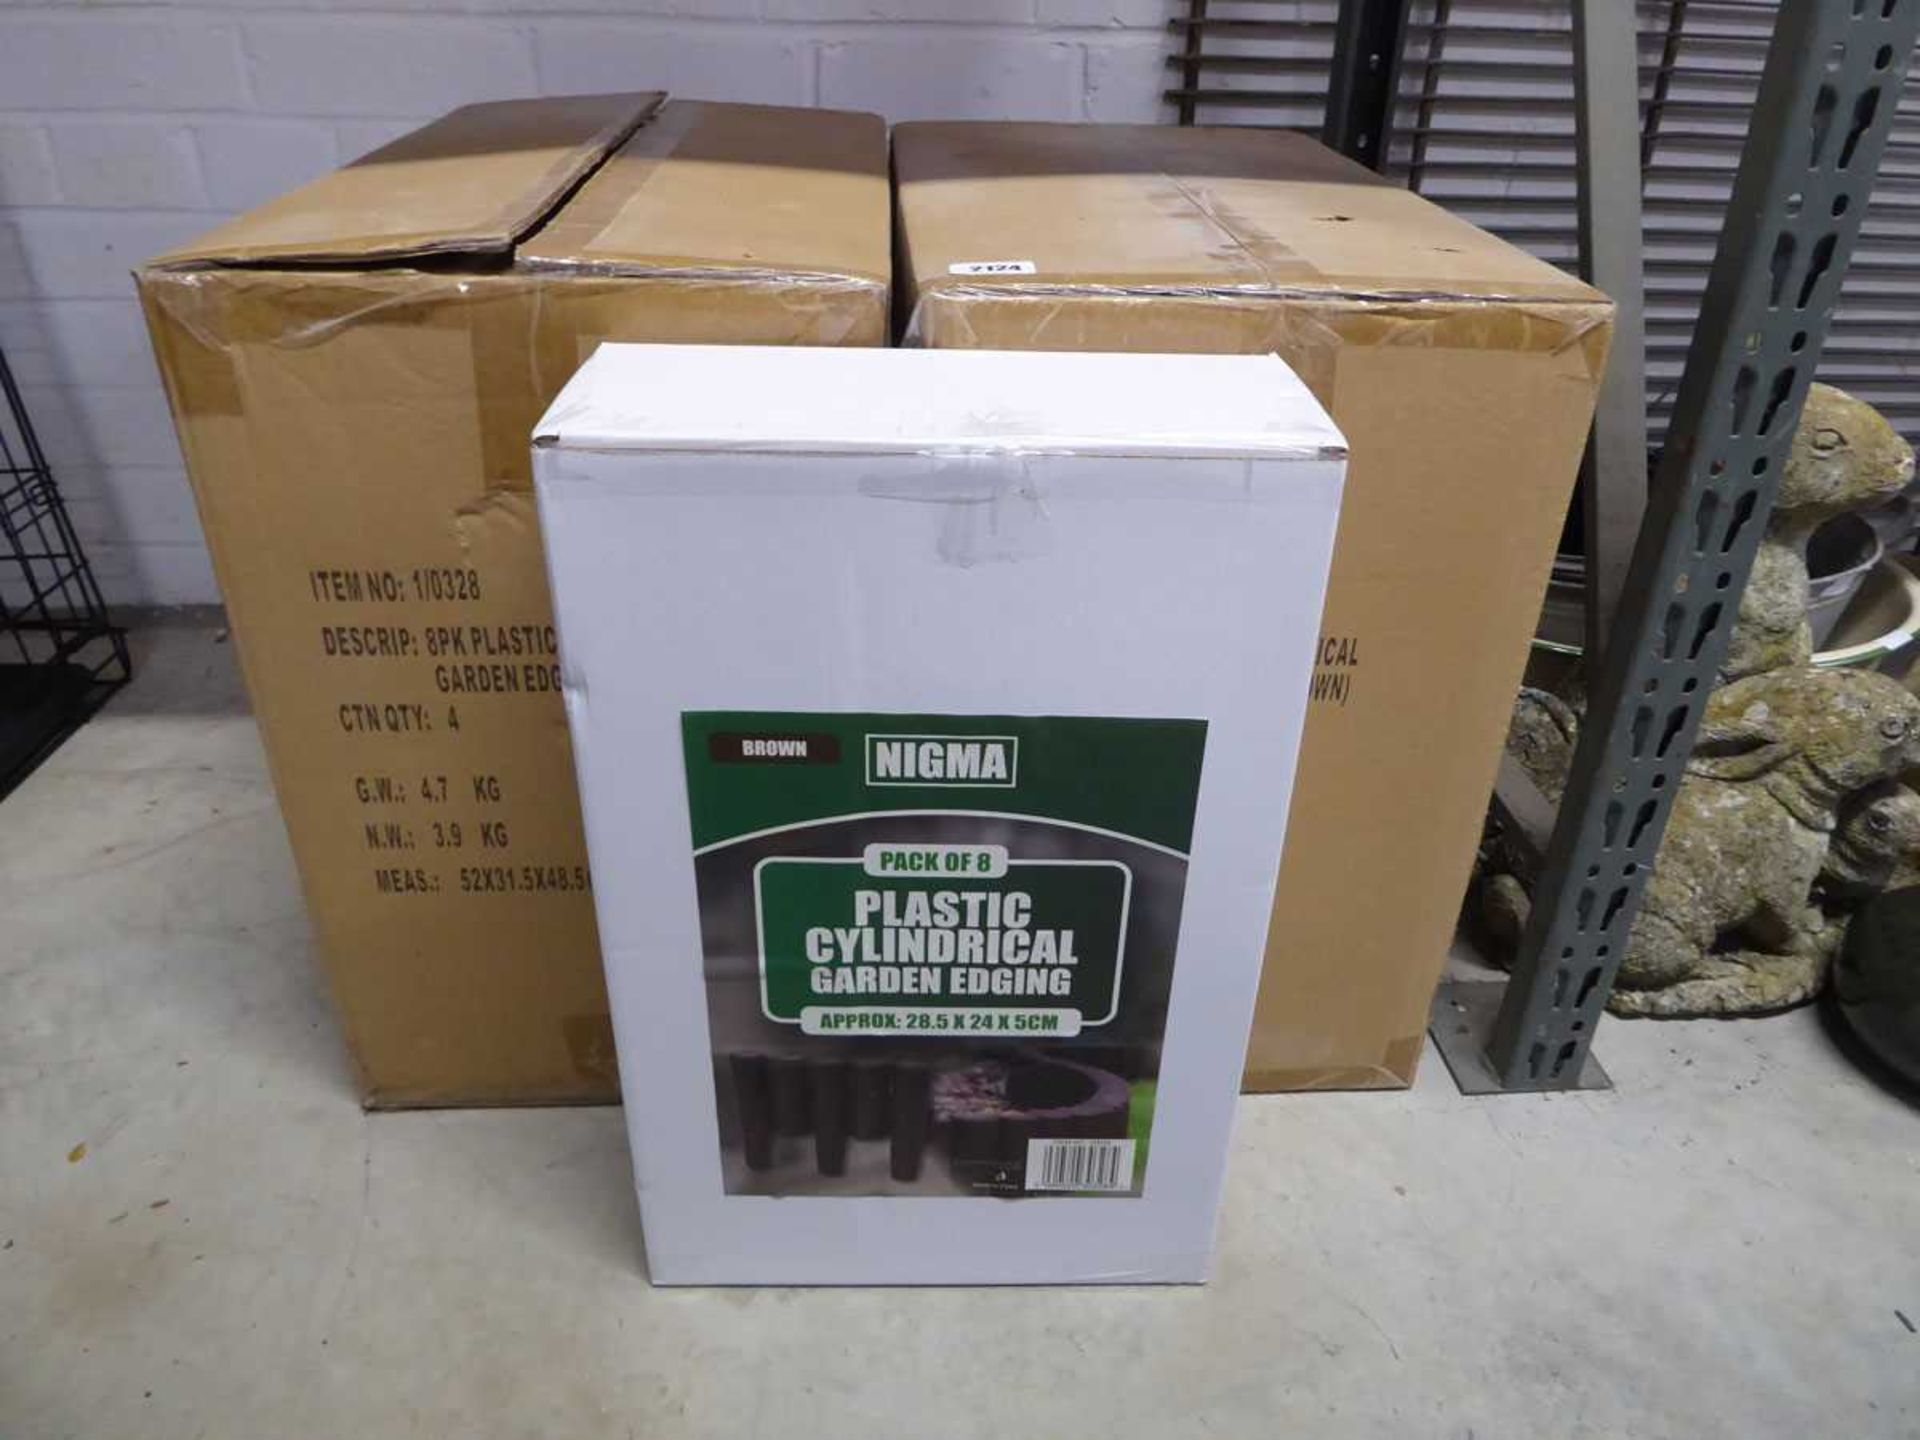 2 boxes containing 8 packs of dark brown plastic cylindrical garden edging